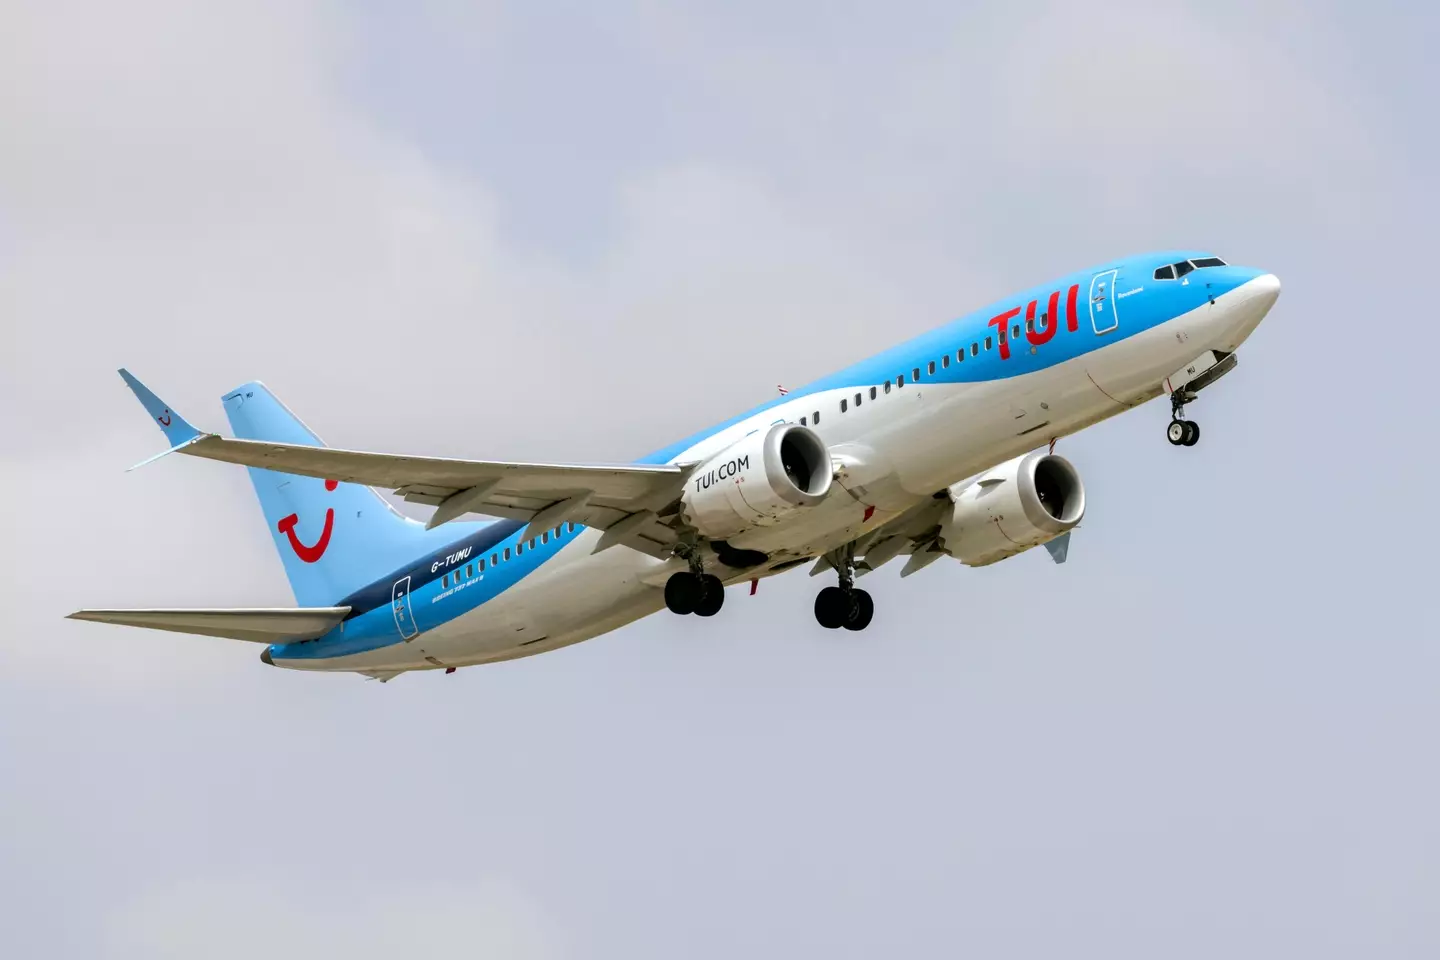 TUI said 'operational issues' caused the delays.